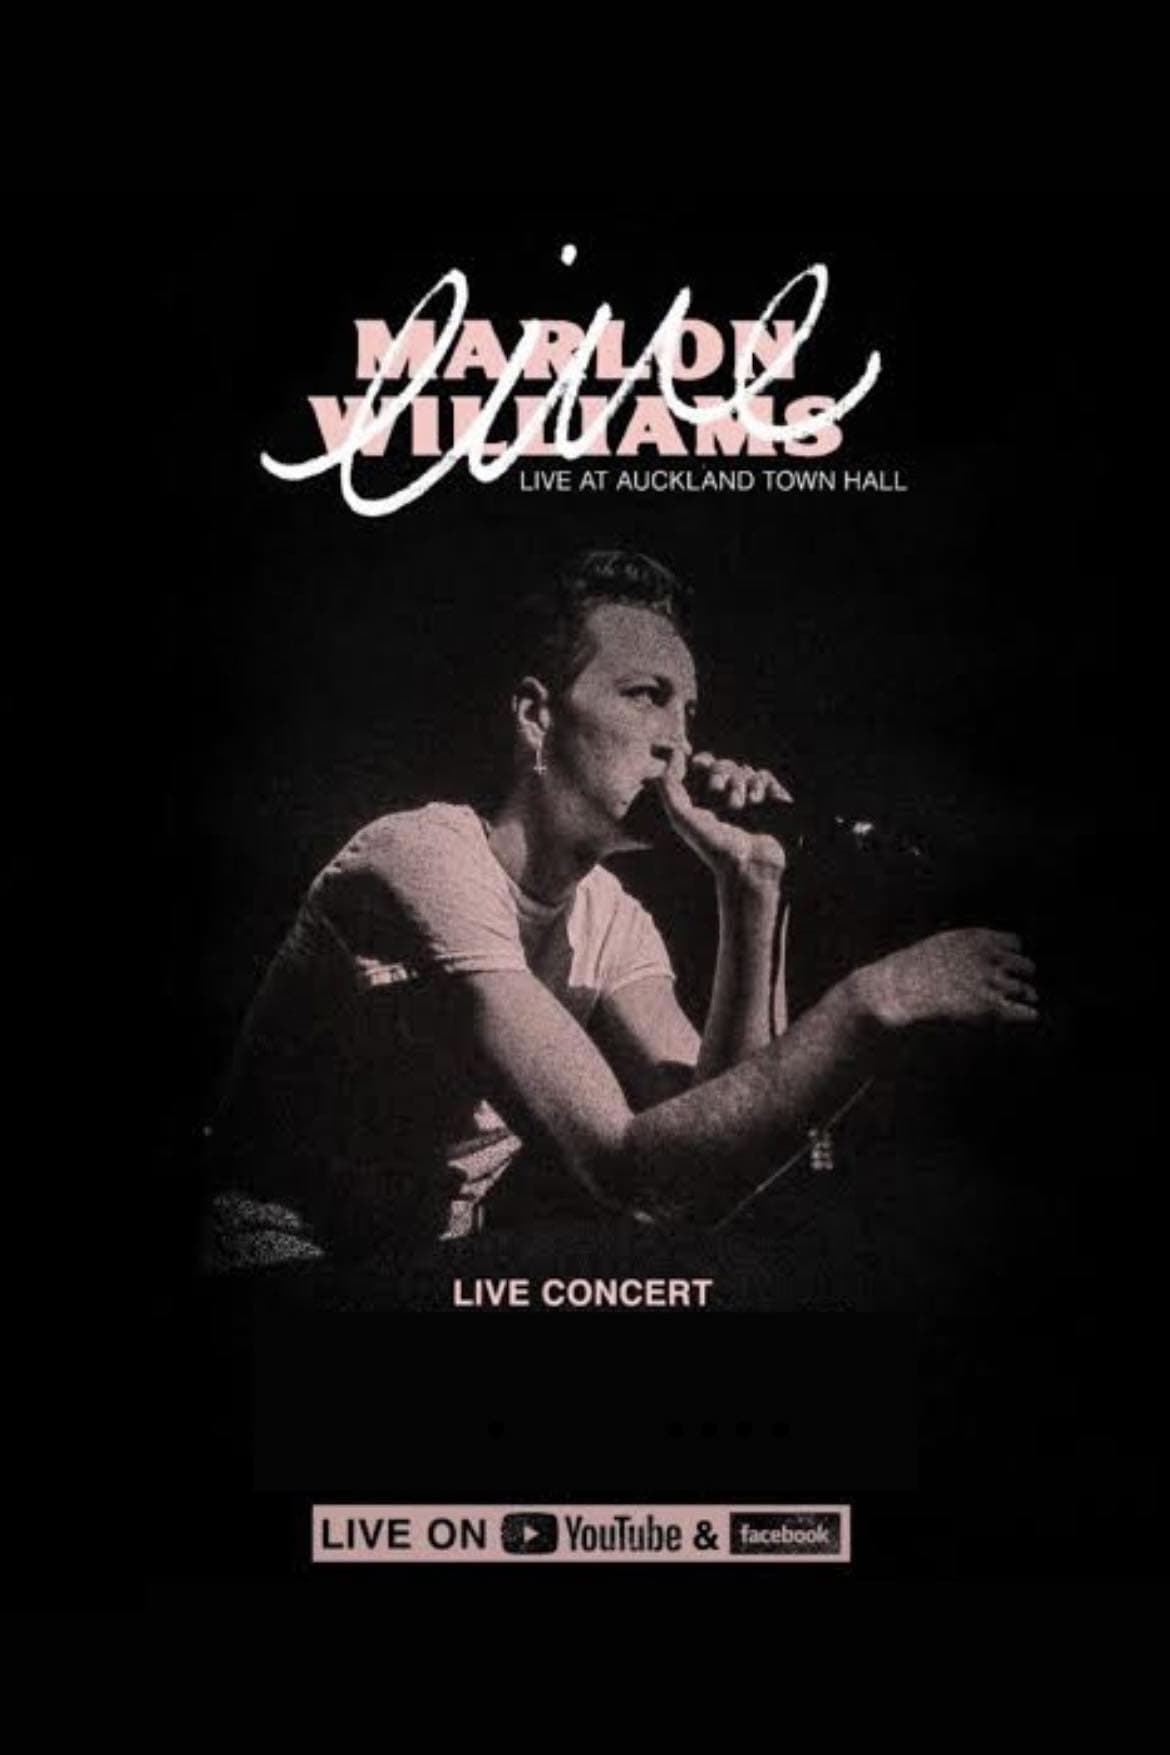 Marlon Williams: Live at Auckland Town Hall